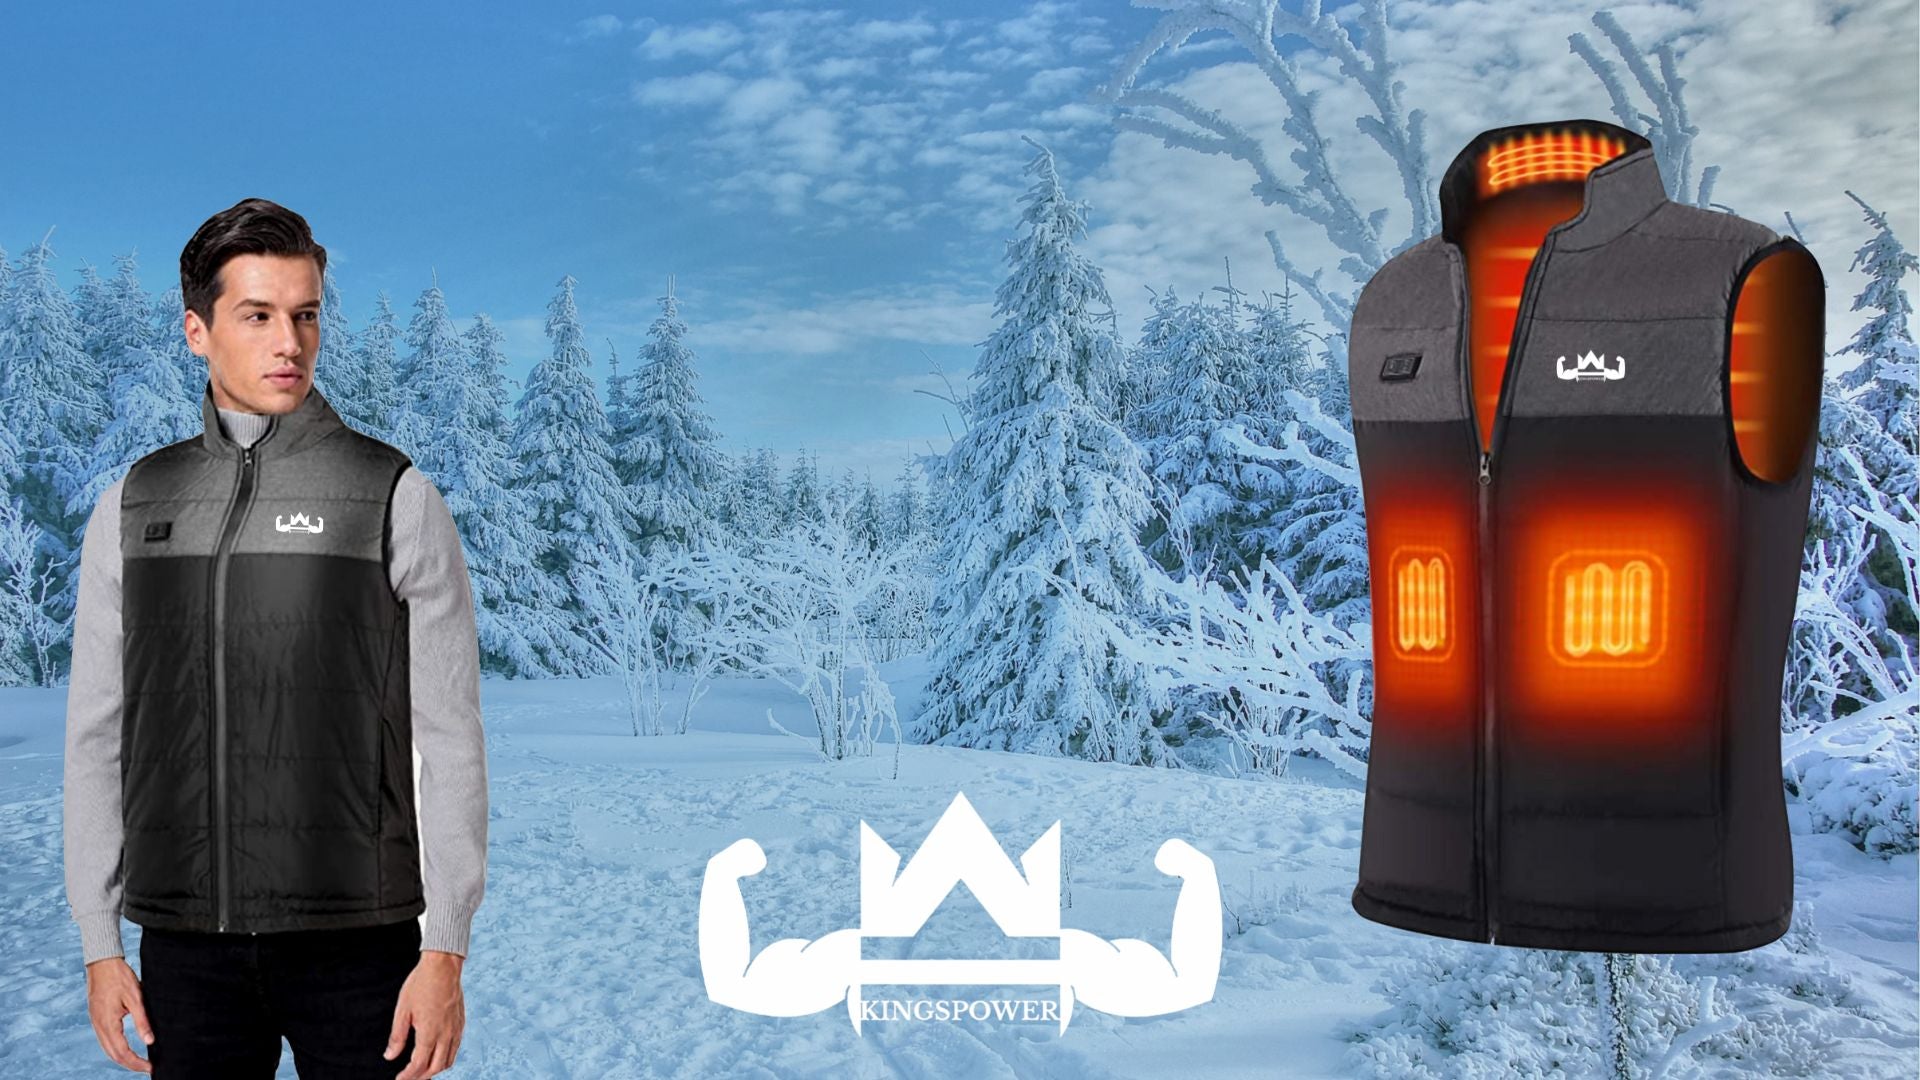 Ladda video: Manual of how to use the heated body warmer.